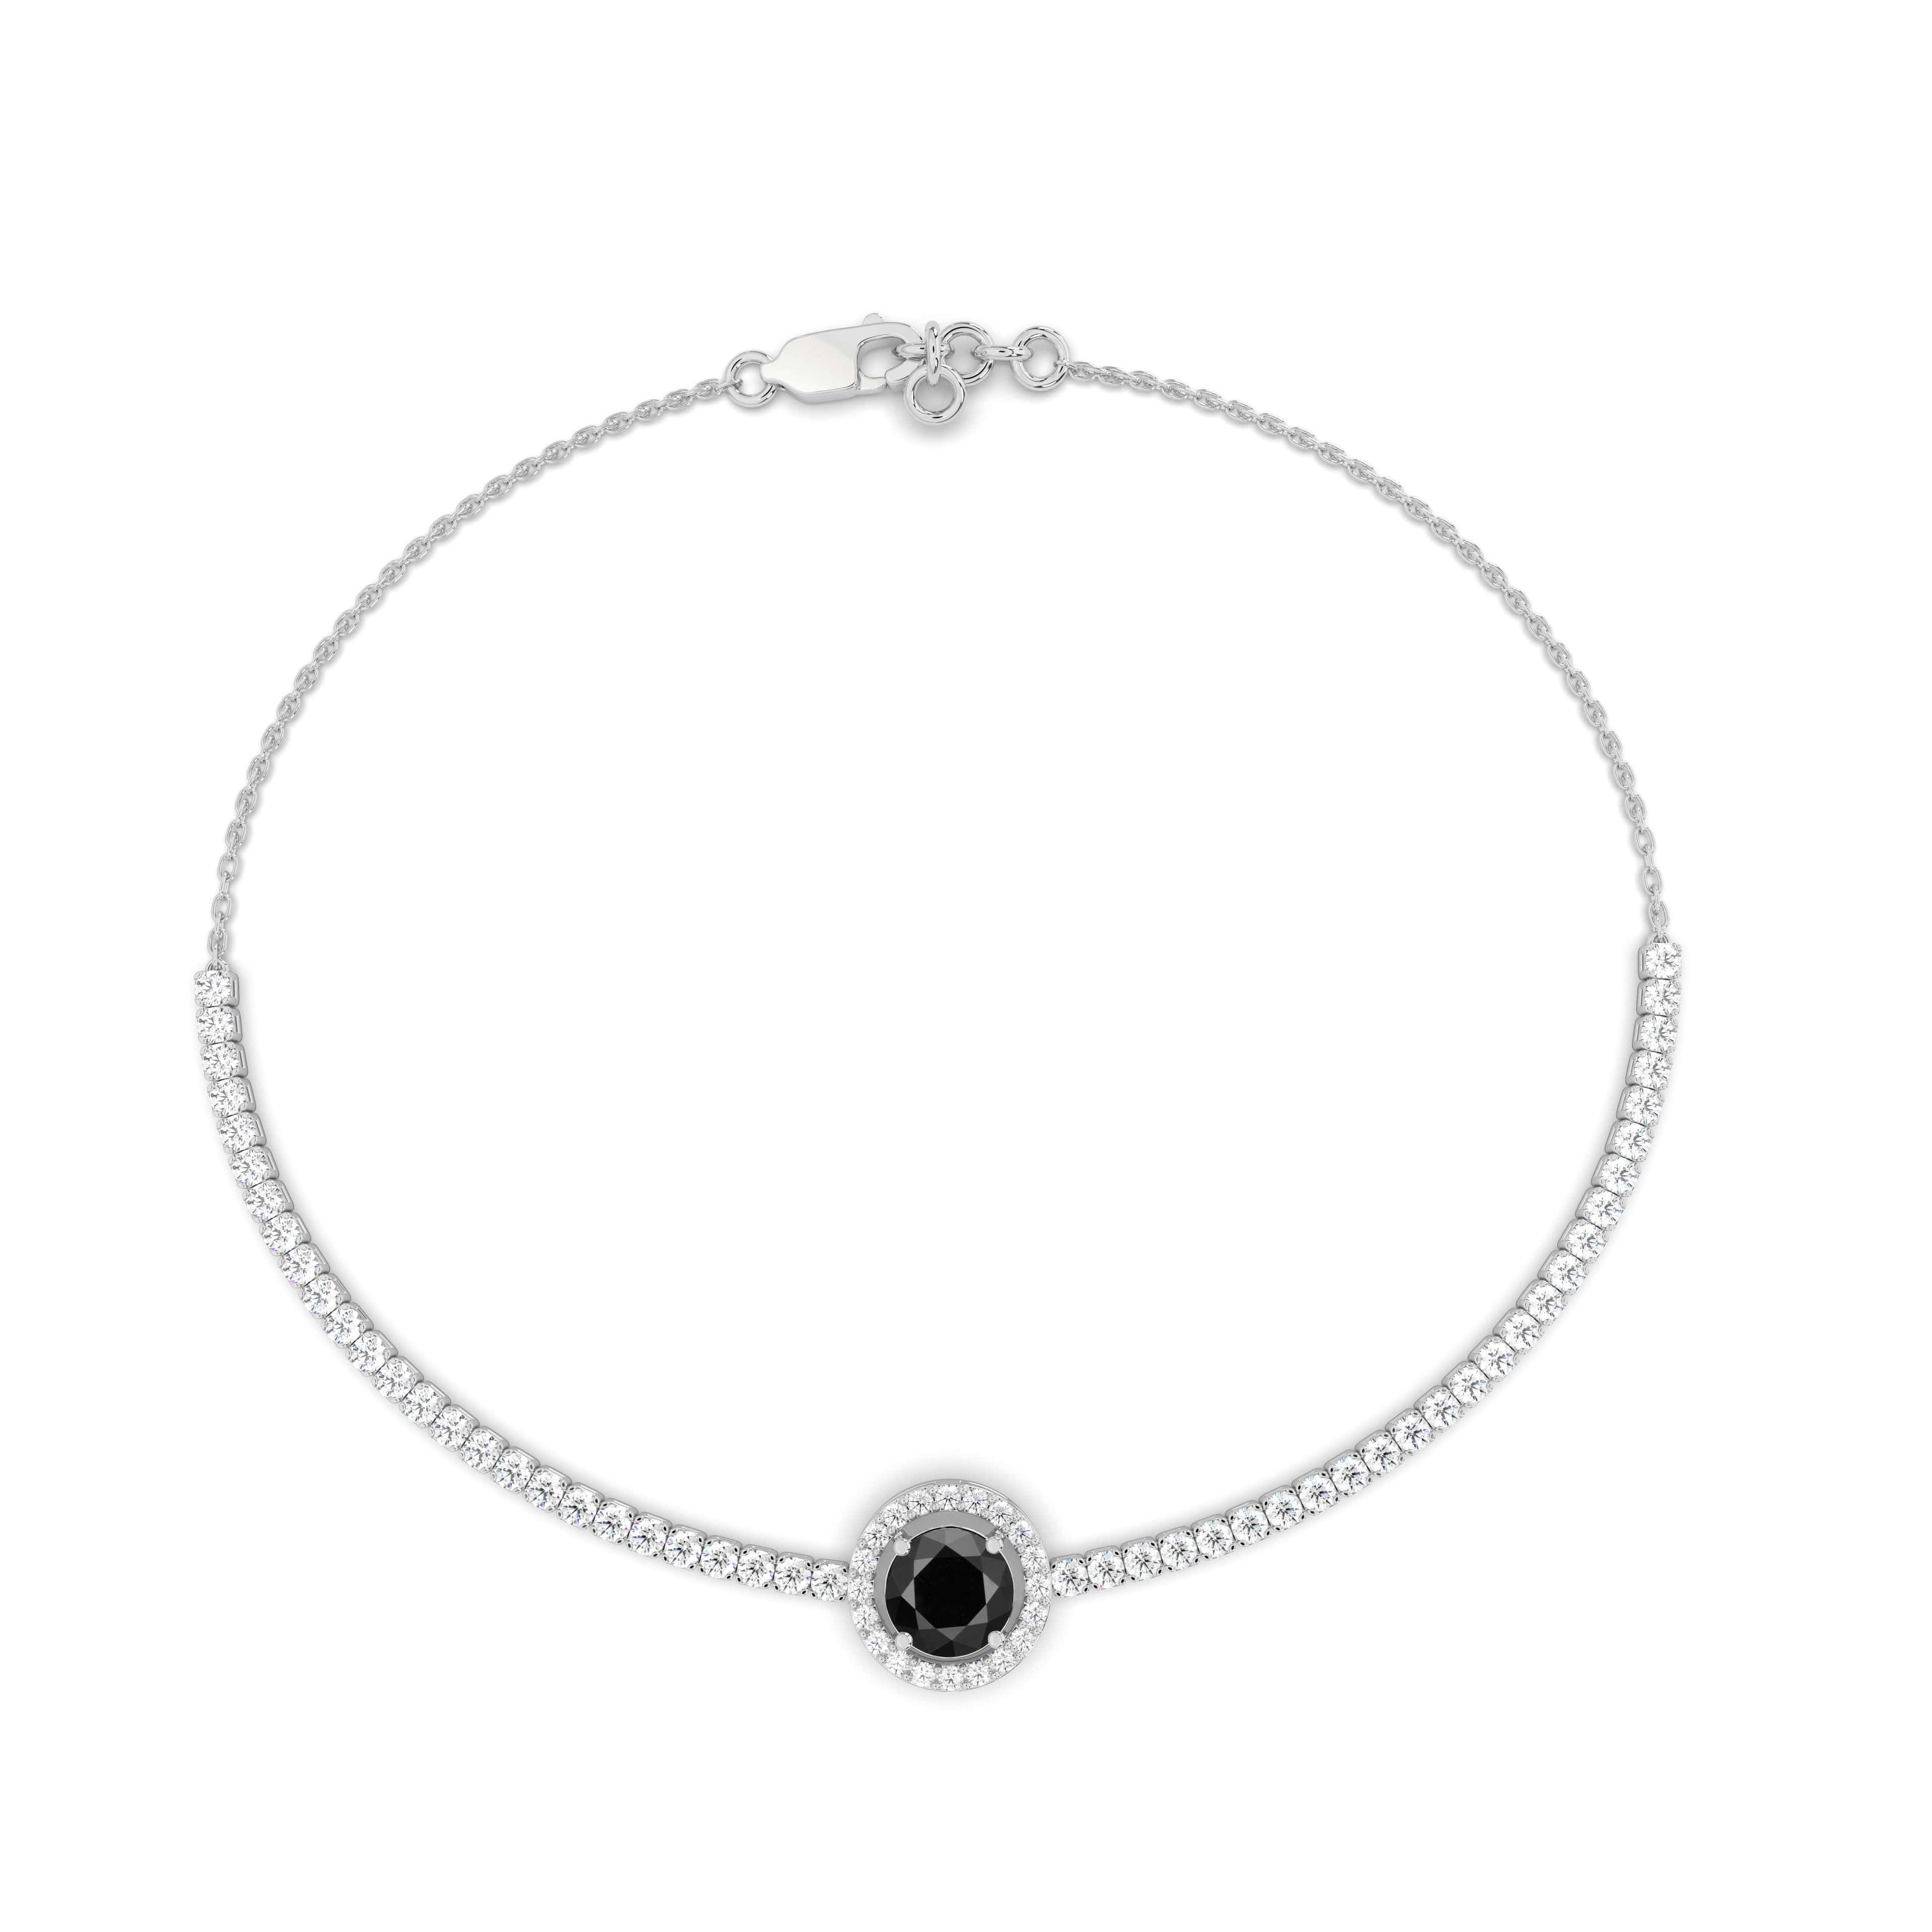 Black Stones, Natural Diamonds and a Modern Approach